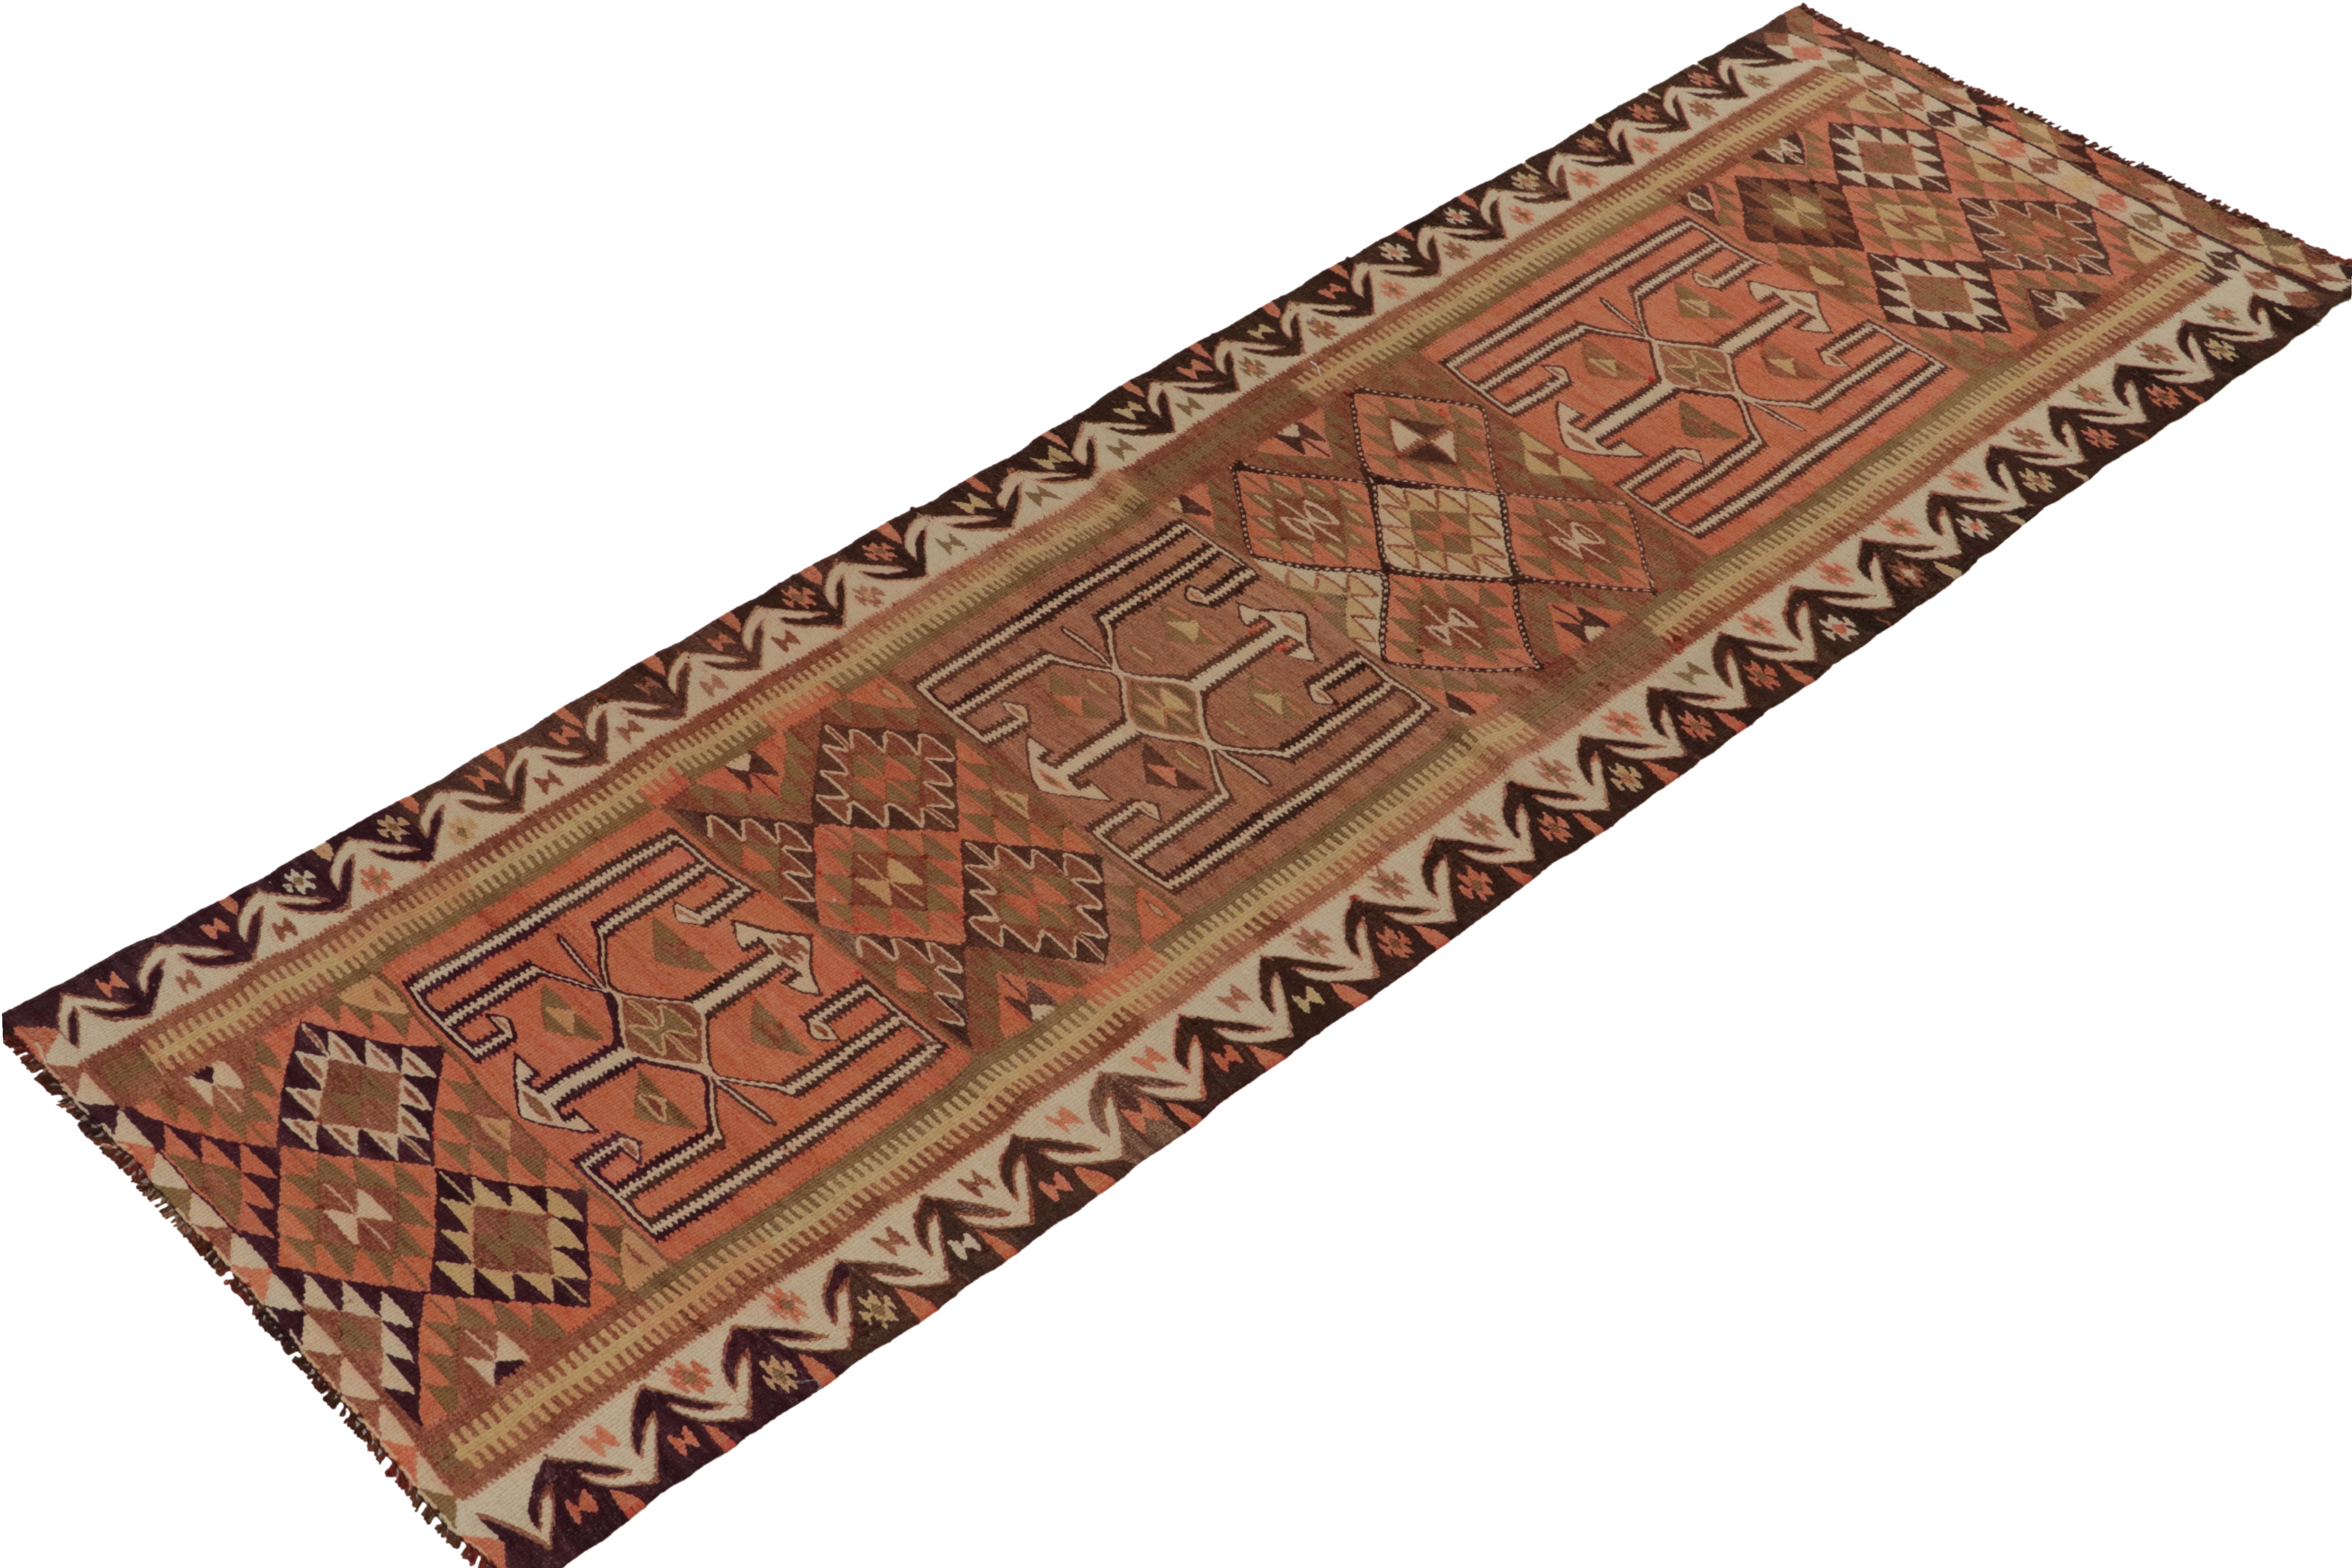 From R&K Principal Josh Nazmiyal’s latest acquisitions, a distinguished vintage kilim runner originating from Turkey circa 1950-1960. 

On the Design: The l tribal geometric pattern enjoys exceptional movement in the warmth & richness of